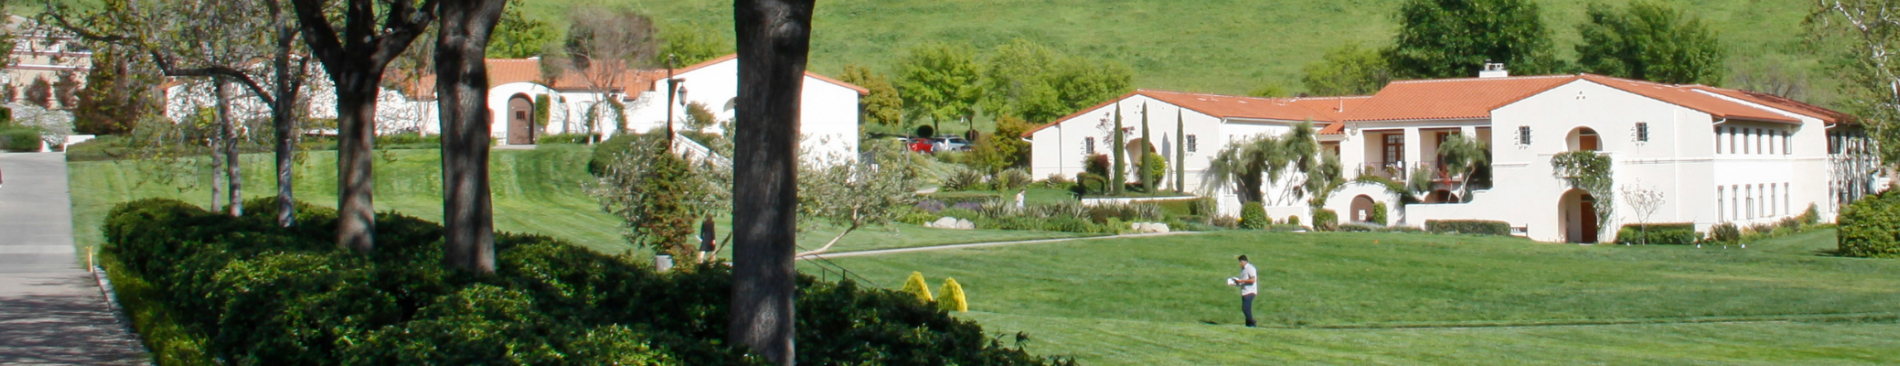 Residential hillside on the California campus